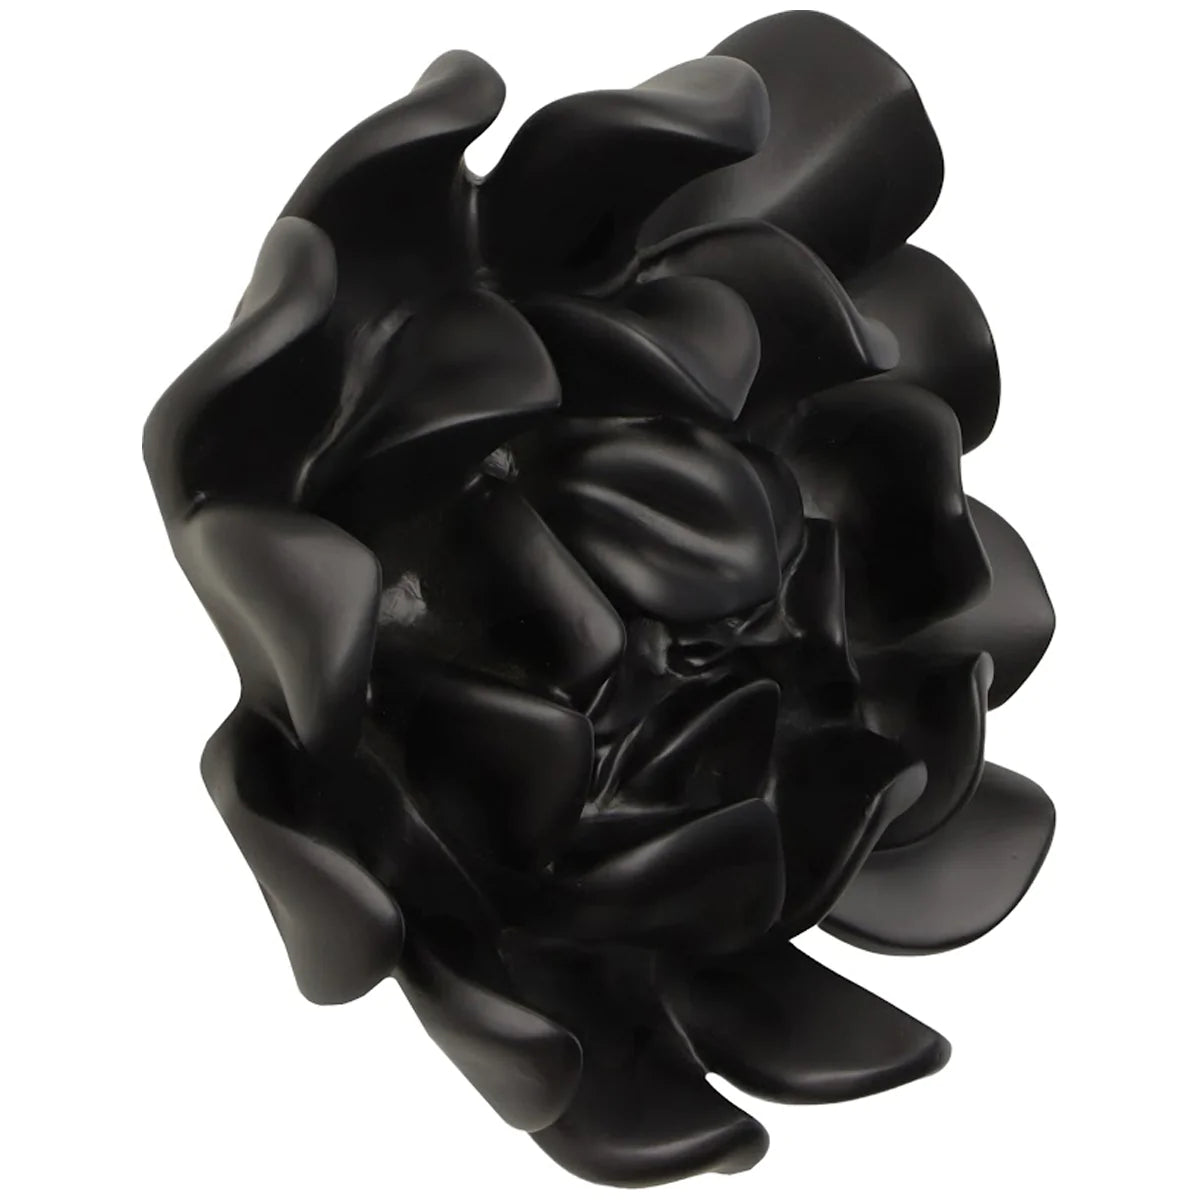 Phillips Collection Topsy Turvy Smooth Black Succulent Wall Art